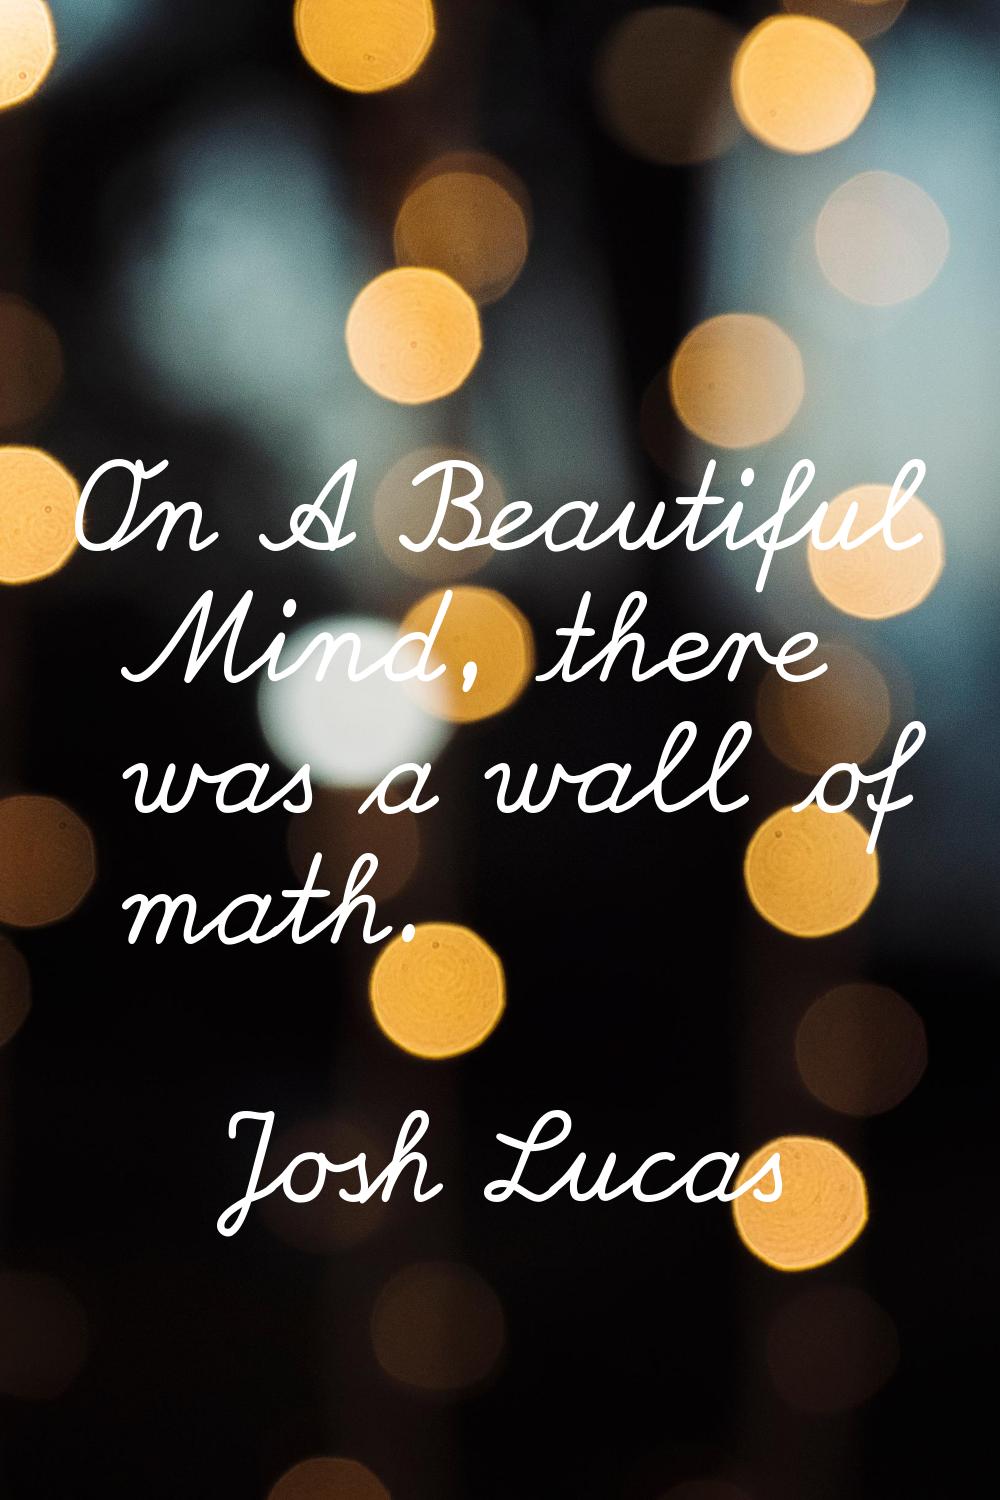 On A Beautiful Mind, there was a wall of math.